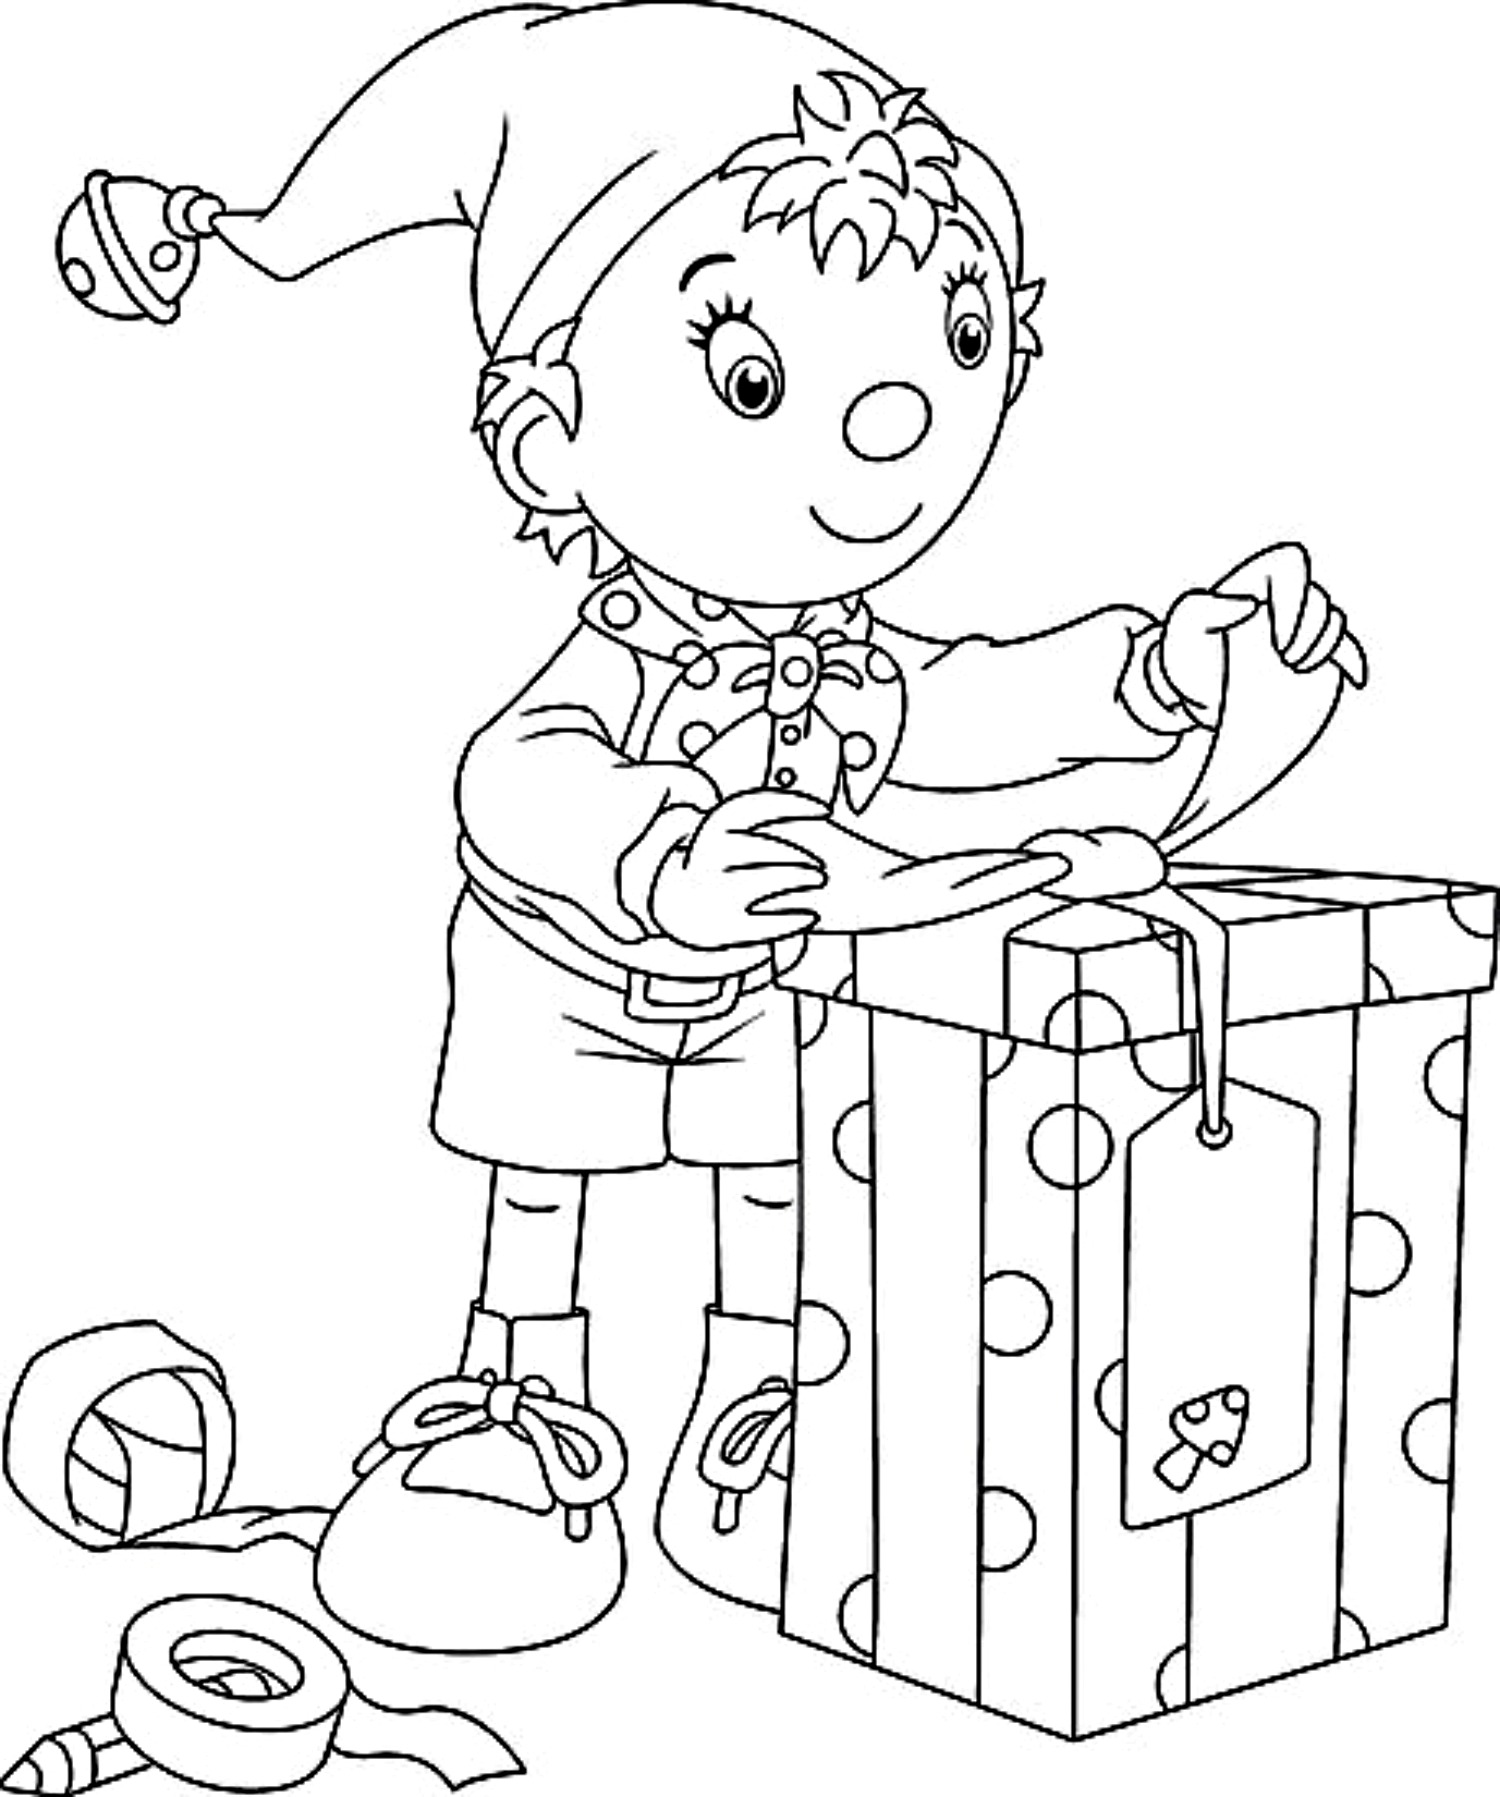 Free Printable Kindergarten Coloring Pages For Kids Coloring 